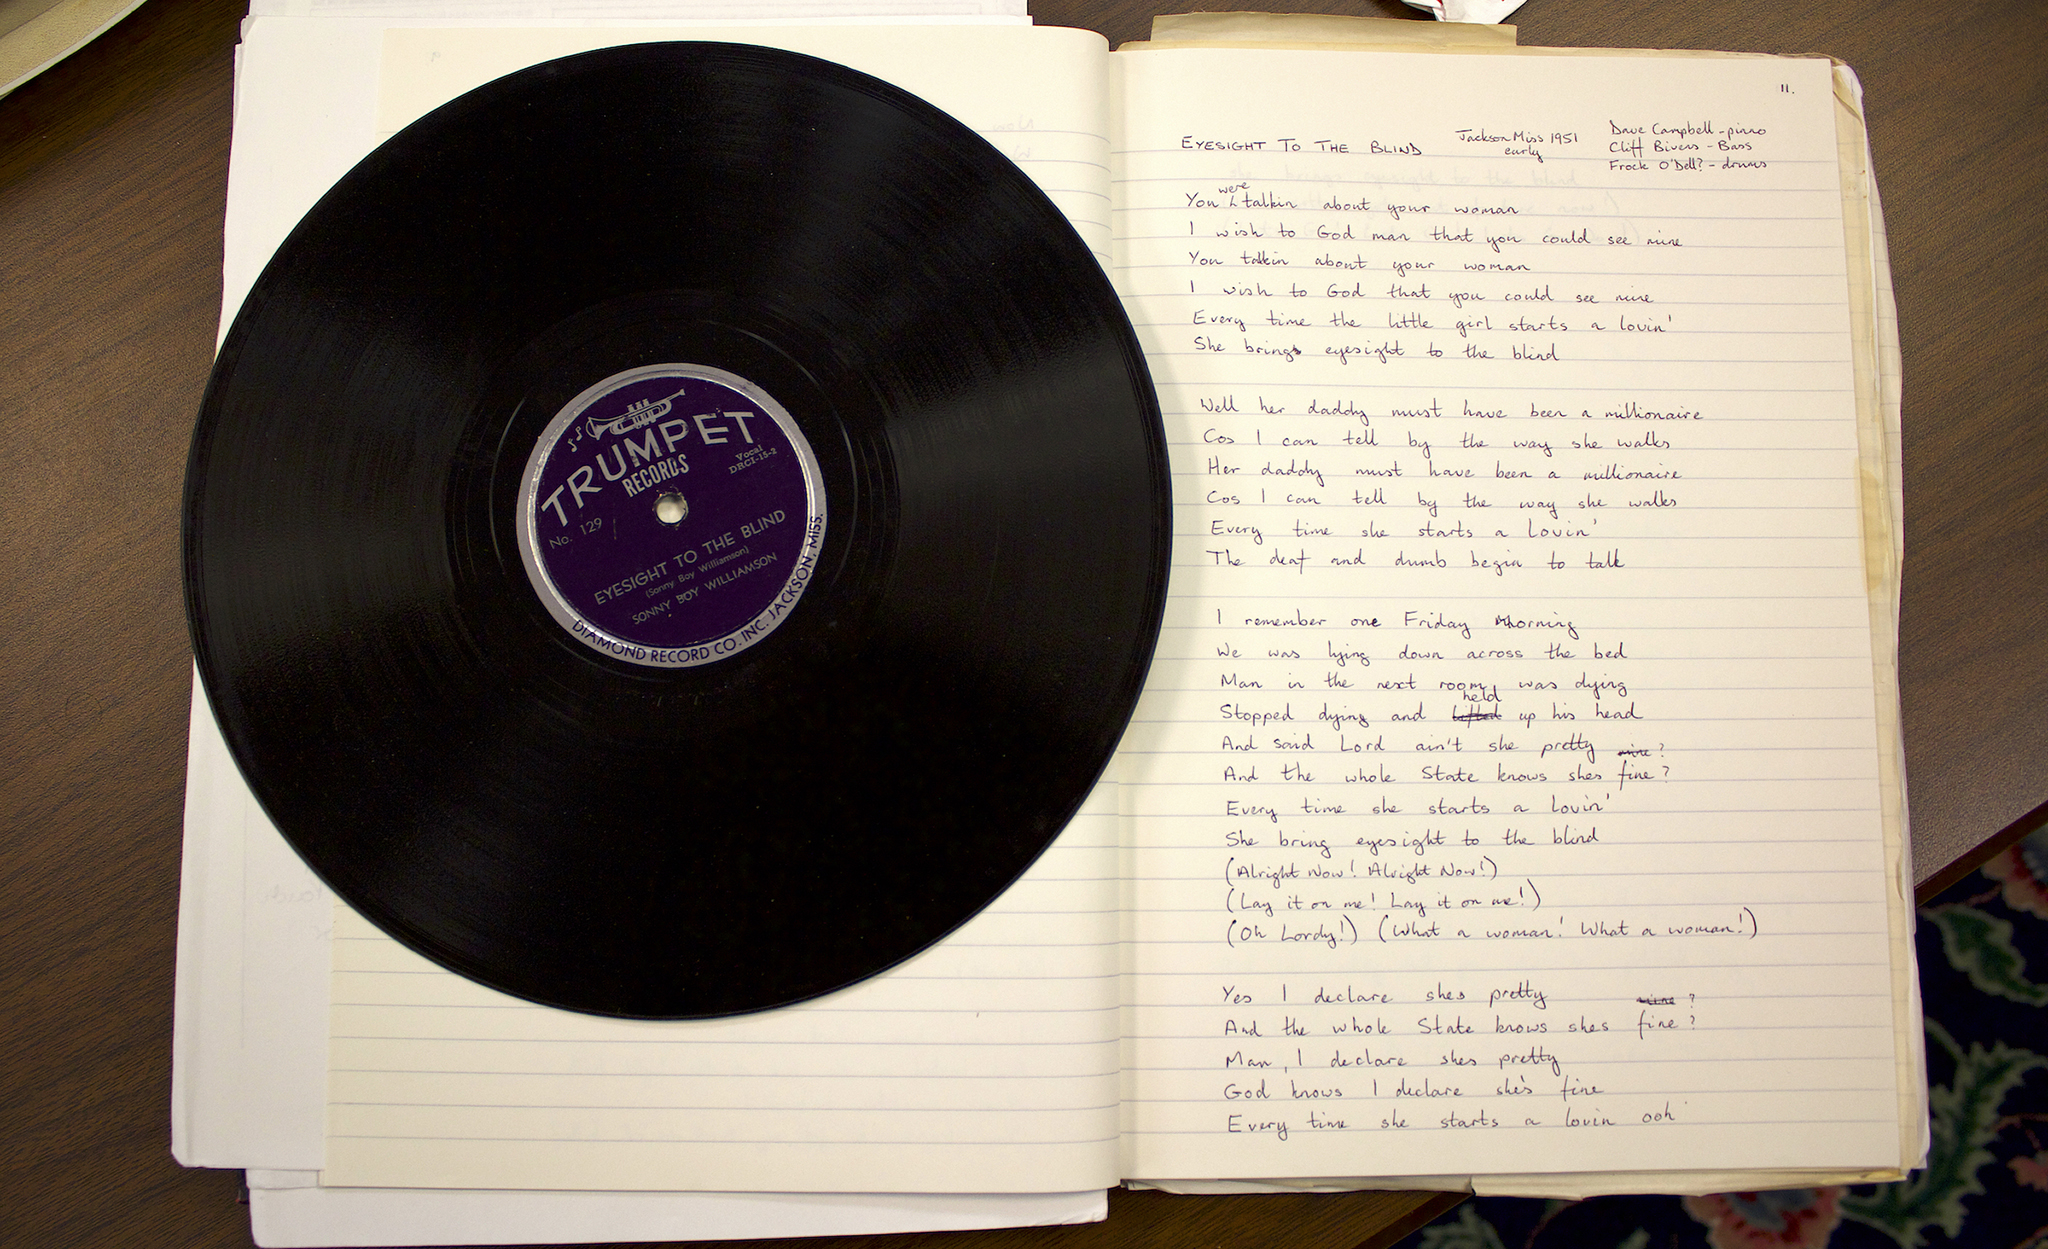 Bill Donaghue's vinyl record sitting on a notebook with song lyrics hand written